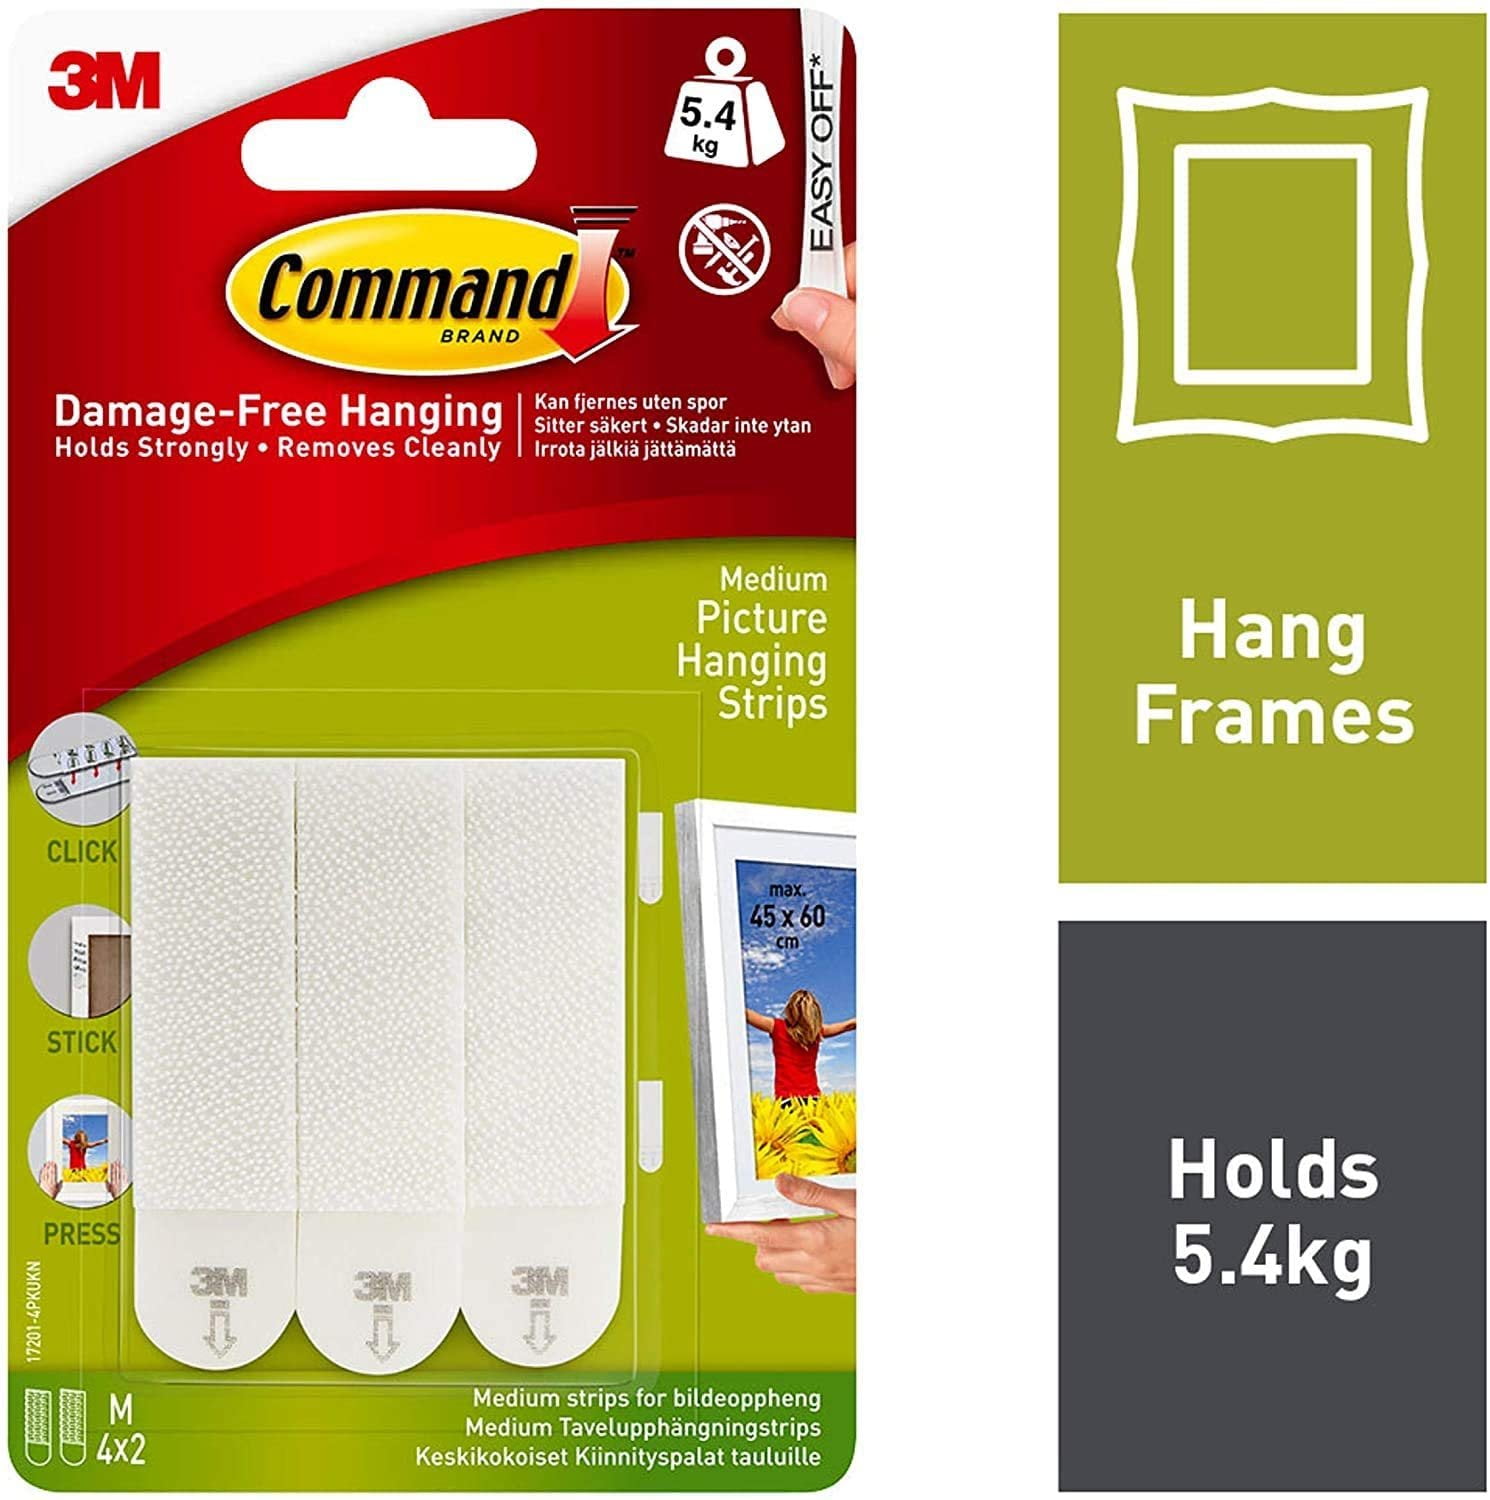 Command Large Picture Hanging Strips, White, Damage Free Hanging, 12 Pairs  - DroneUp Delivery